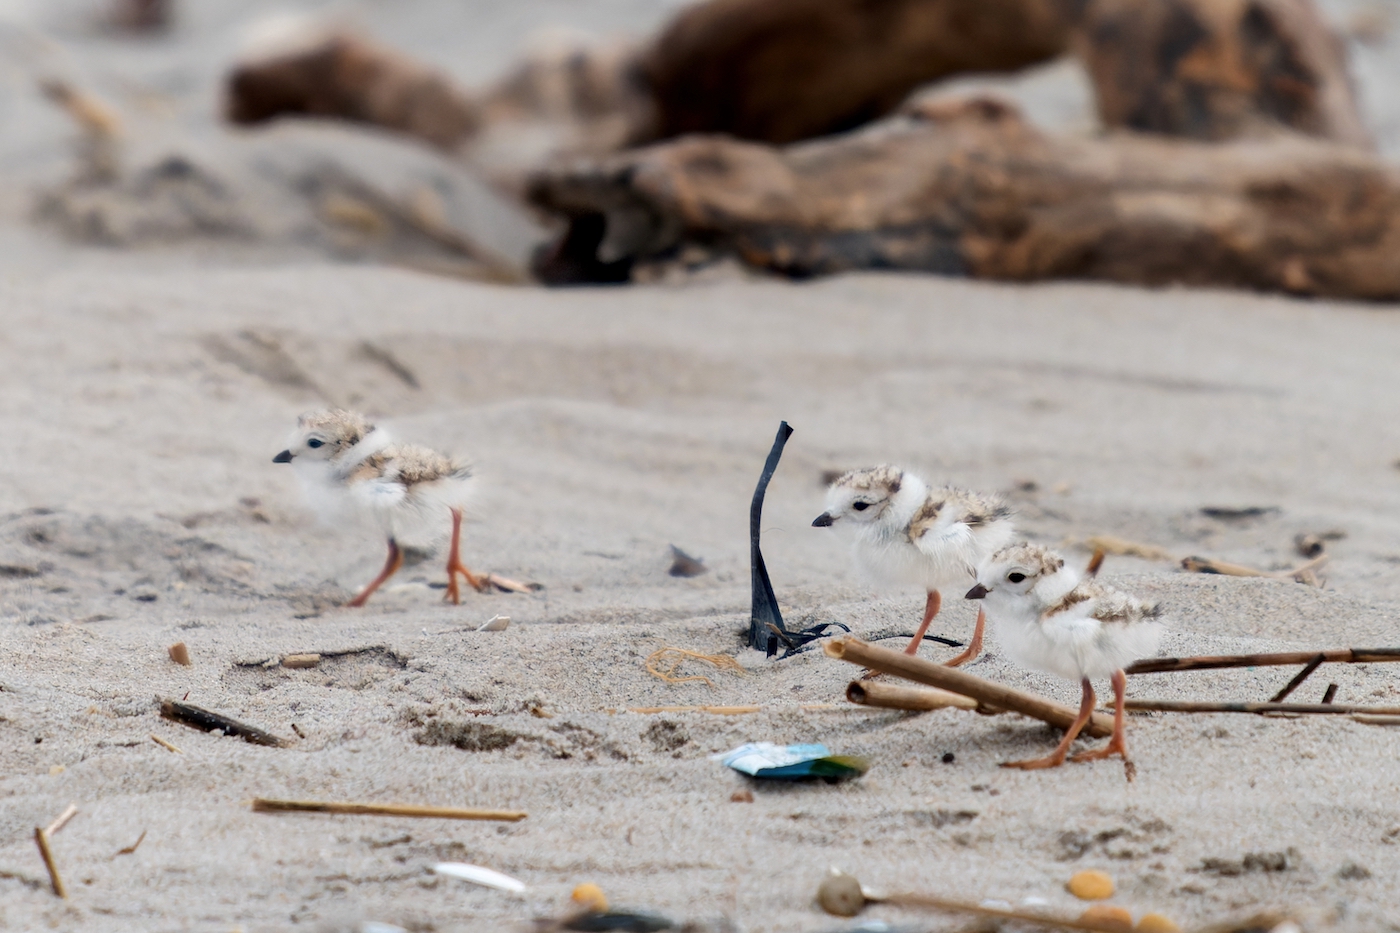 three tiny, fluffy birds with orange legs about the same length as their bodies stand in profile facing the left of the frame. Around them is beach debris (twigs, plastic bag pieces), which looks huge compared to the birds.